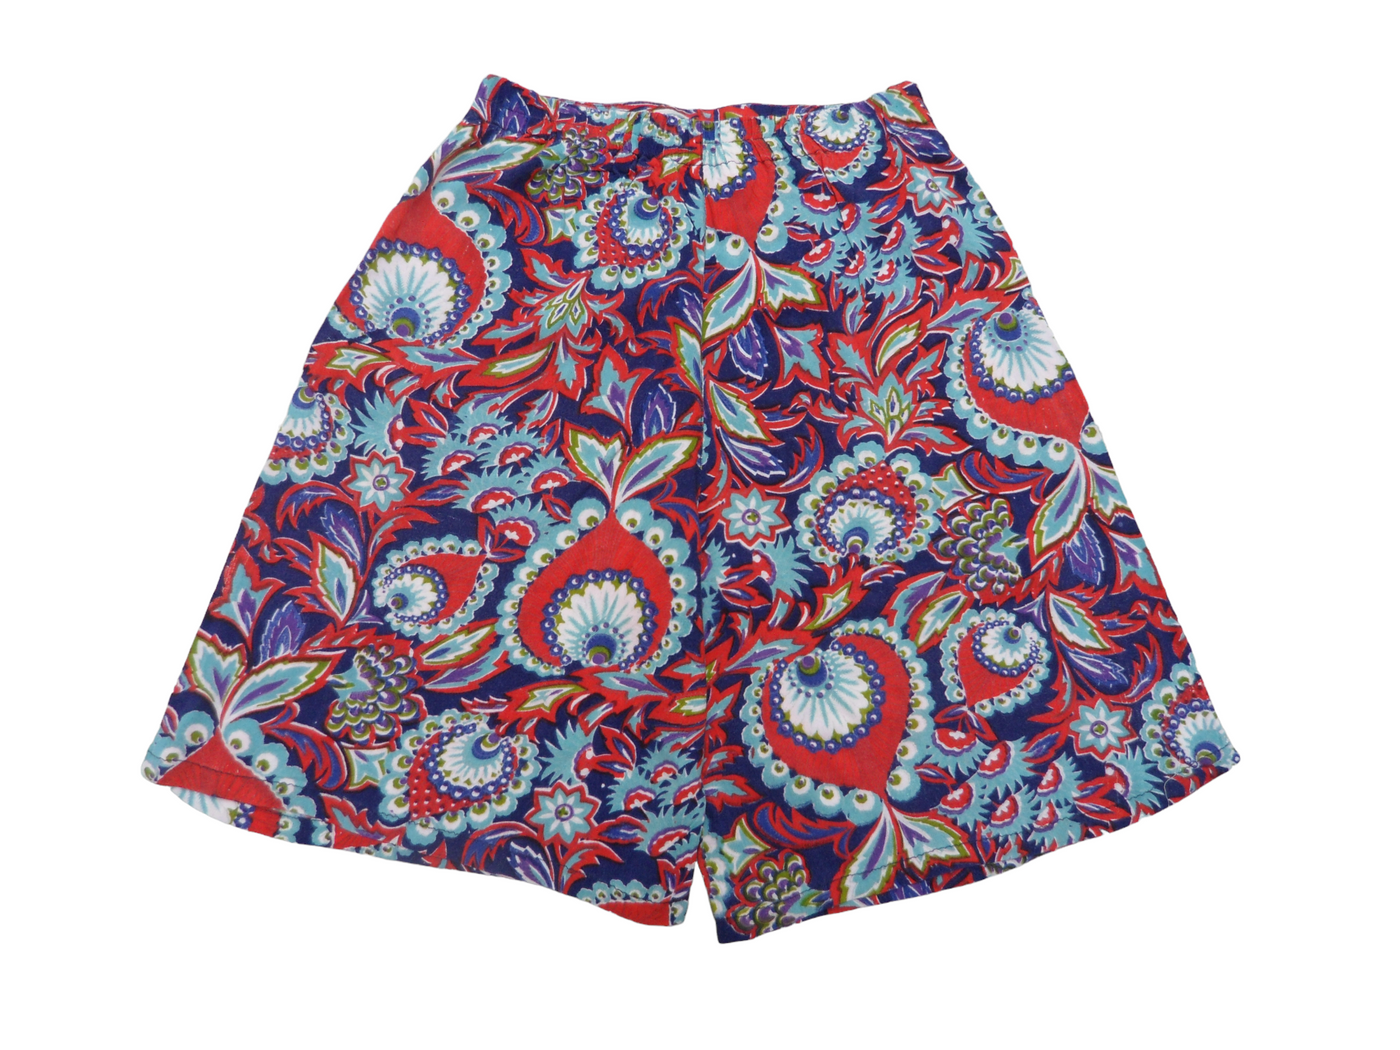 Vintage Red and Blue Floral printed Women's High waisted Shorts Size - 10/12 (AU)